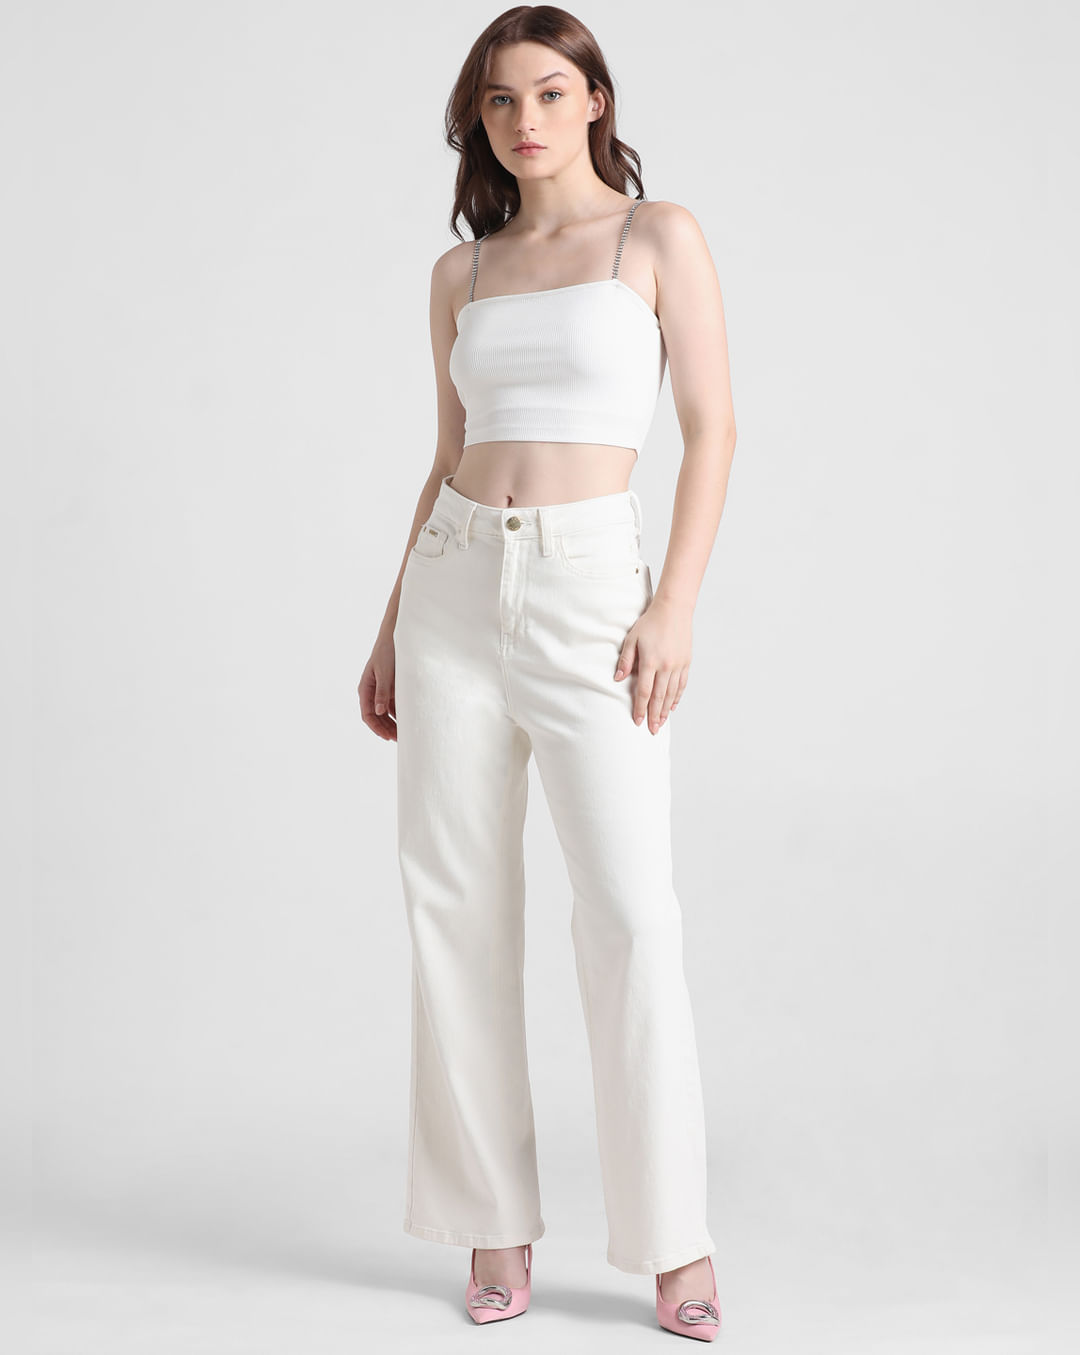 White Bandeau Tailored Top<!-- --> - <!-- -->QUIZ Clothing